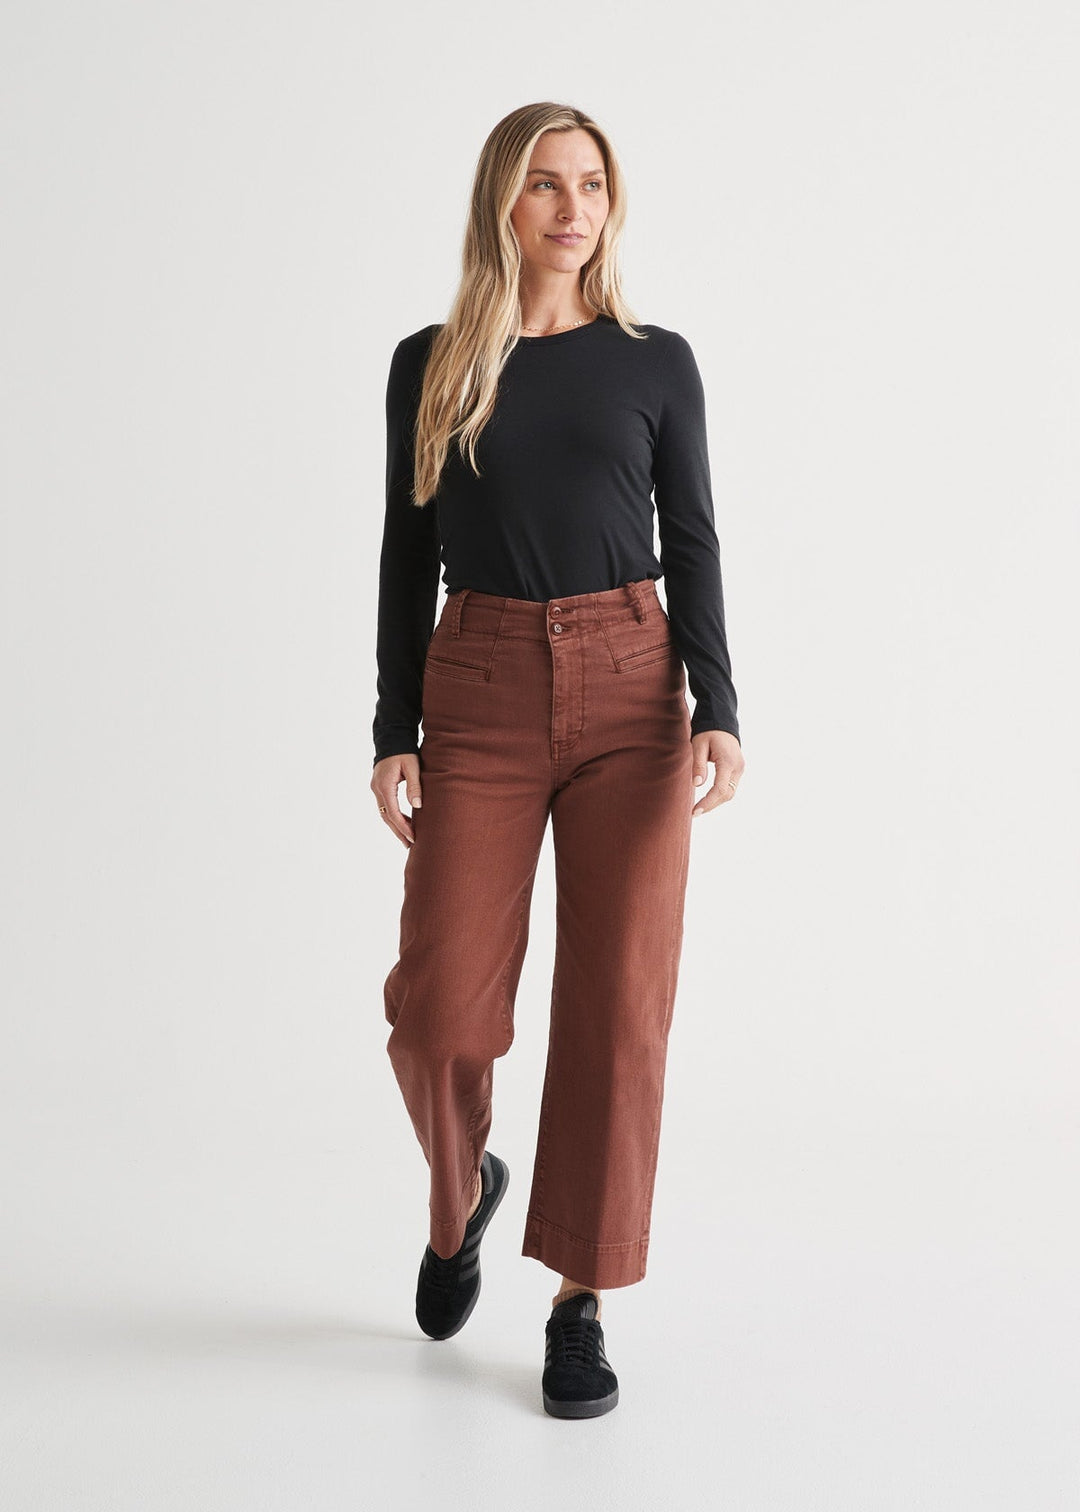 Ethically Sourced Clothing - Pants from All Things Being Eco